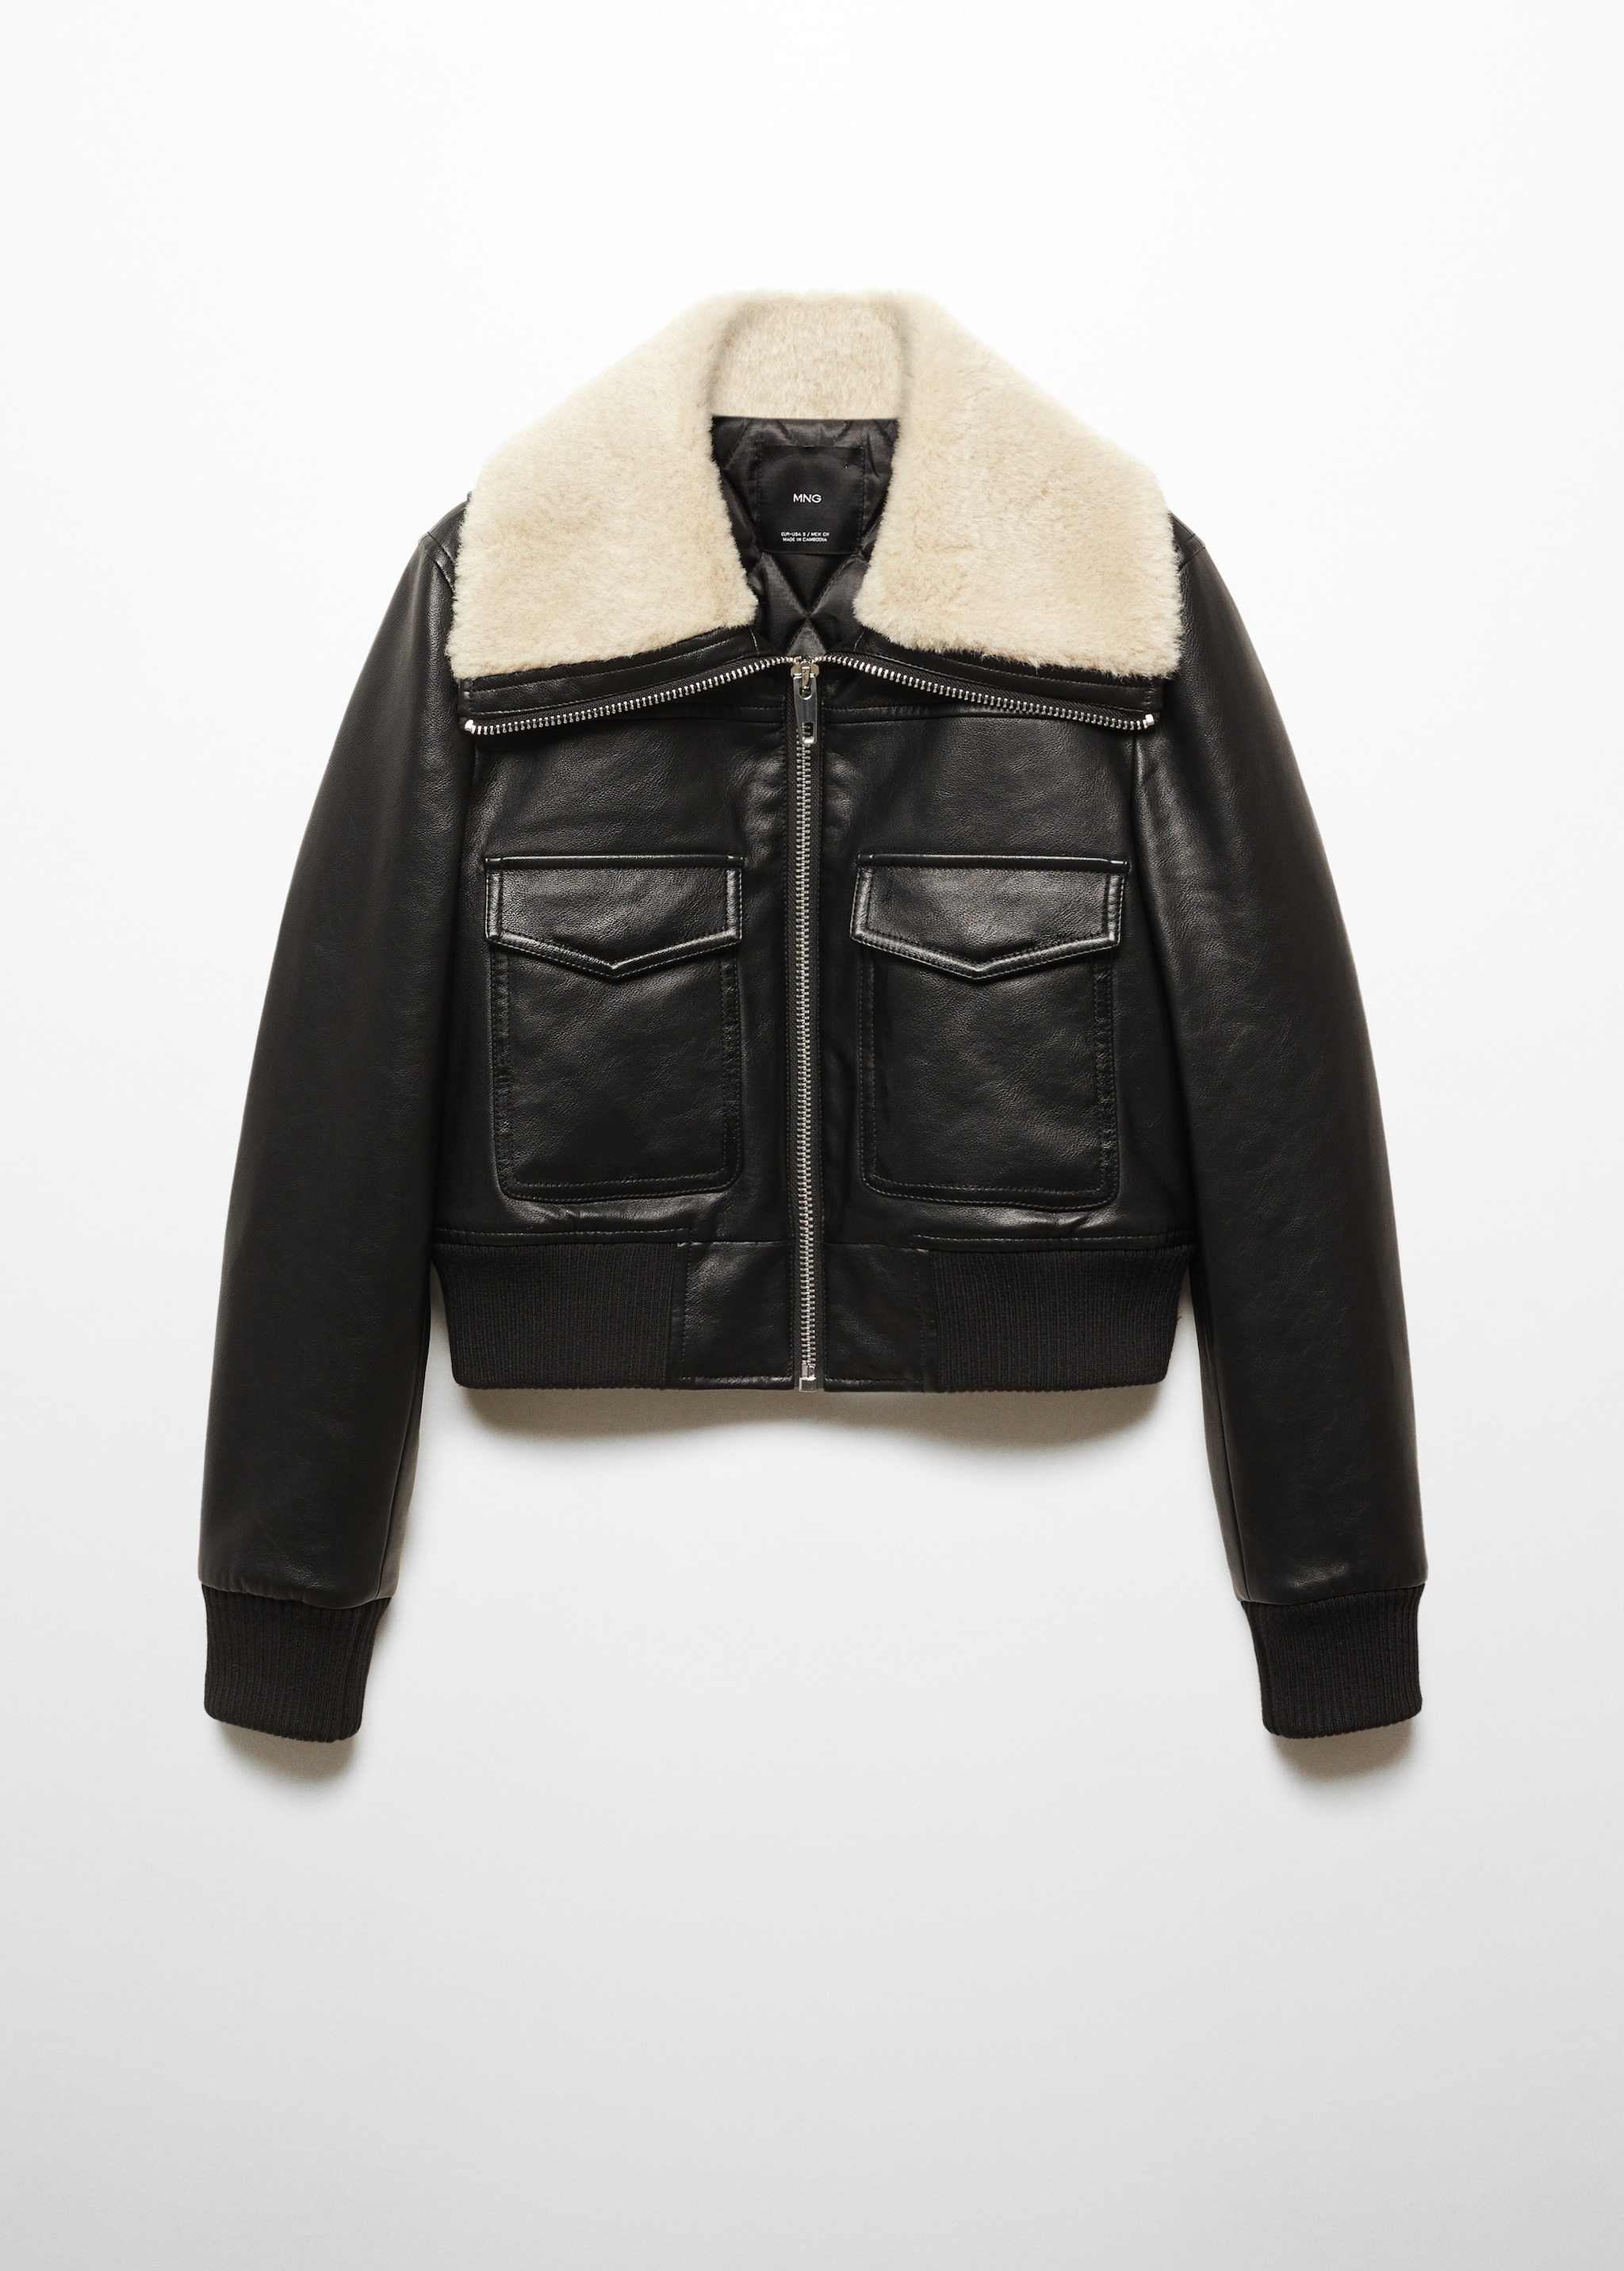 Shearling-lined bomber jacket - Article without model